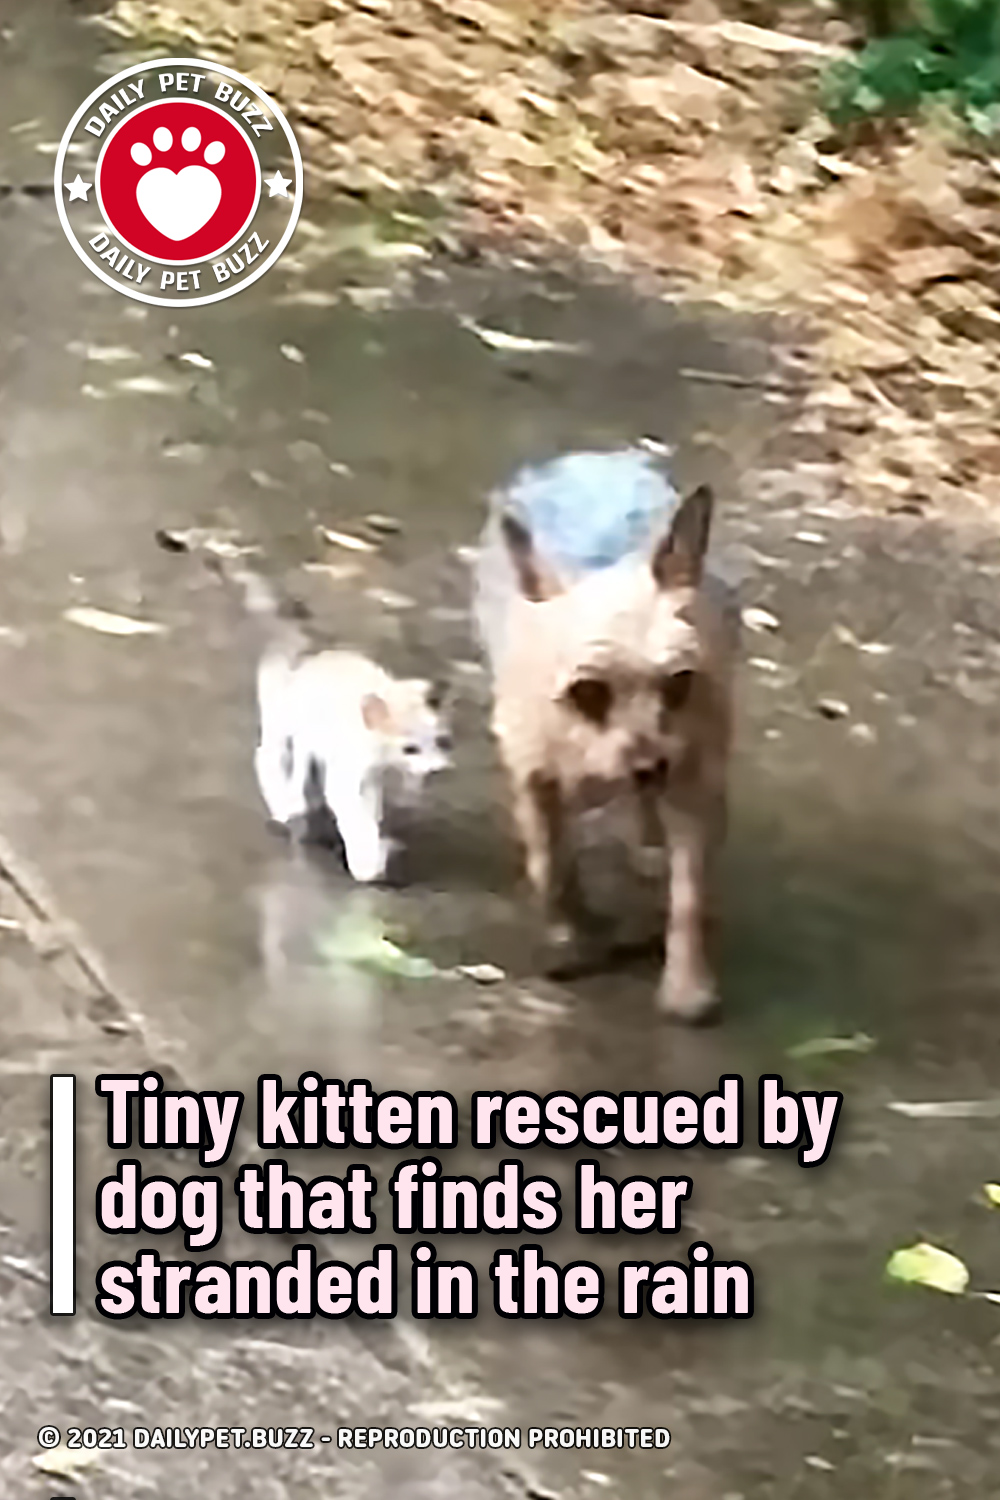 Tiny kitten rescued by dog that finds her stranded in the rain